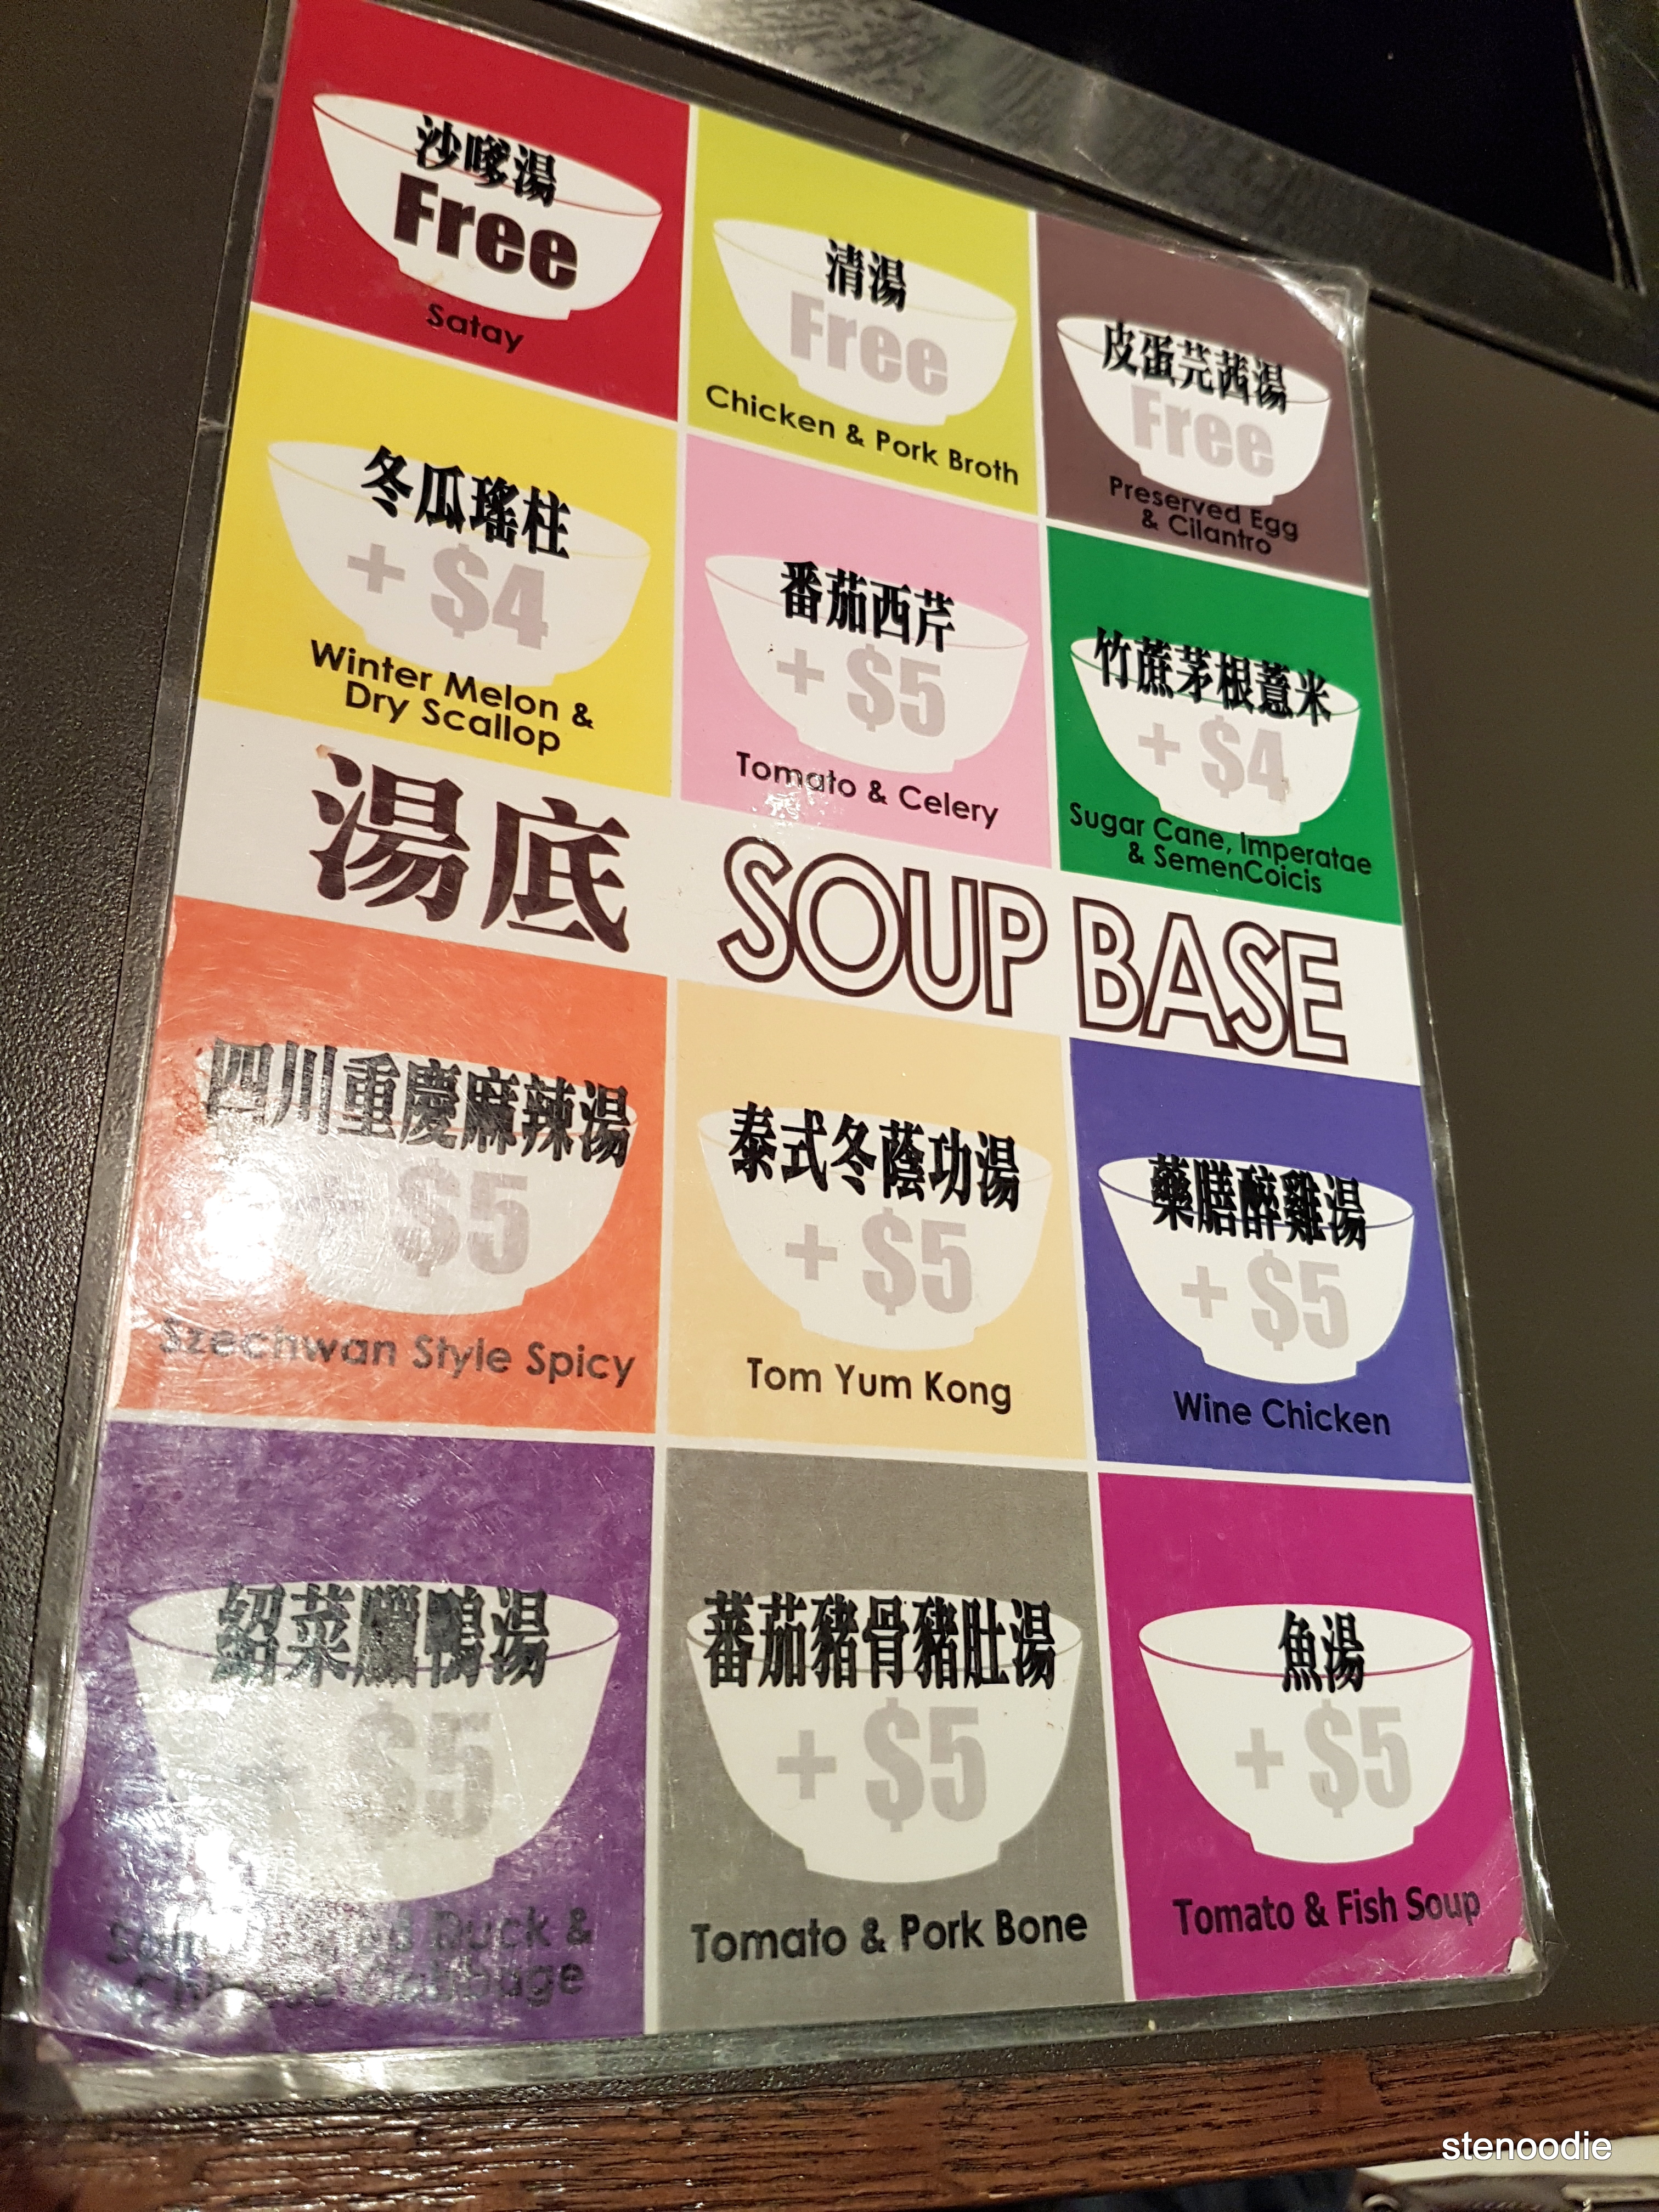 Made in China Hot Pot soup bases